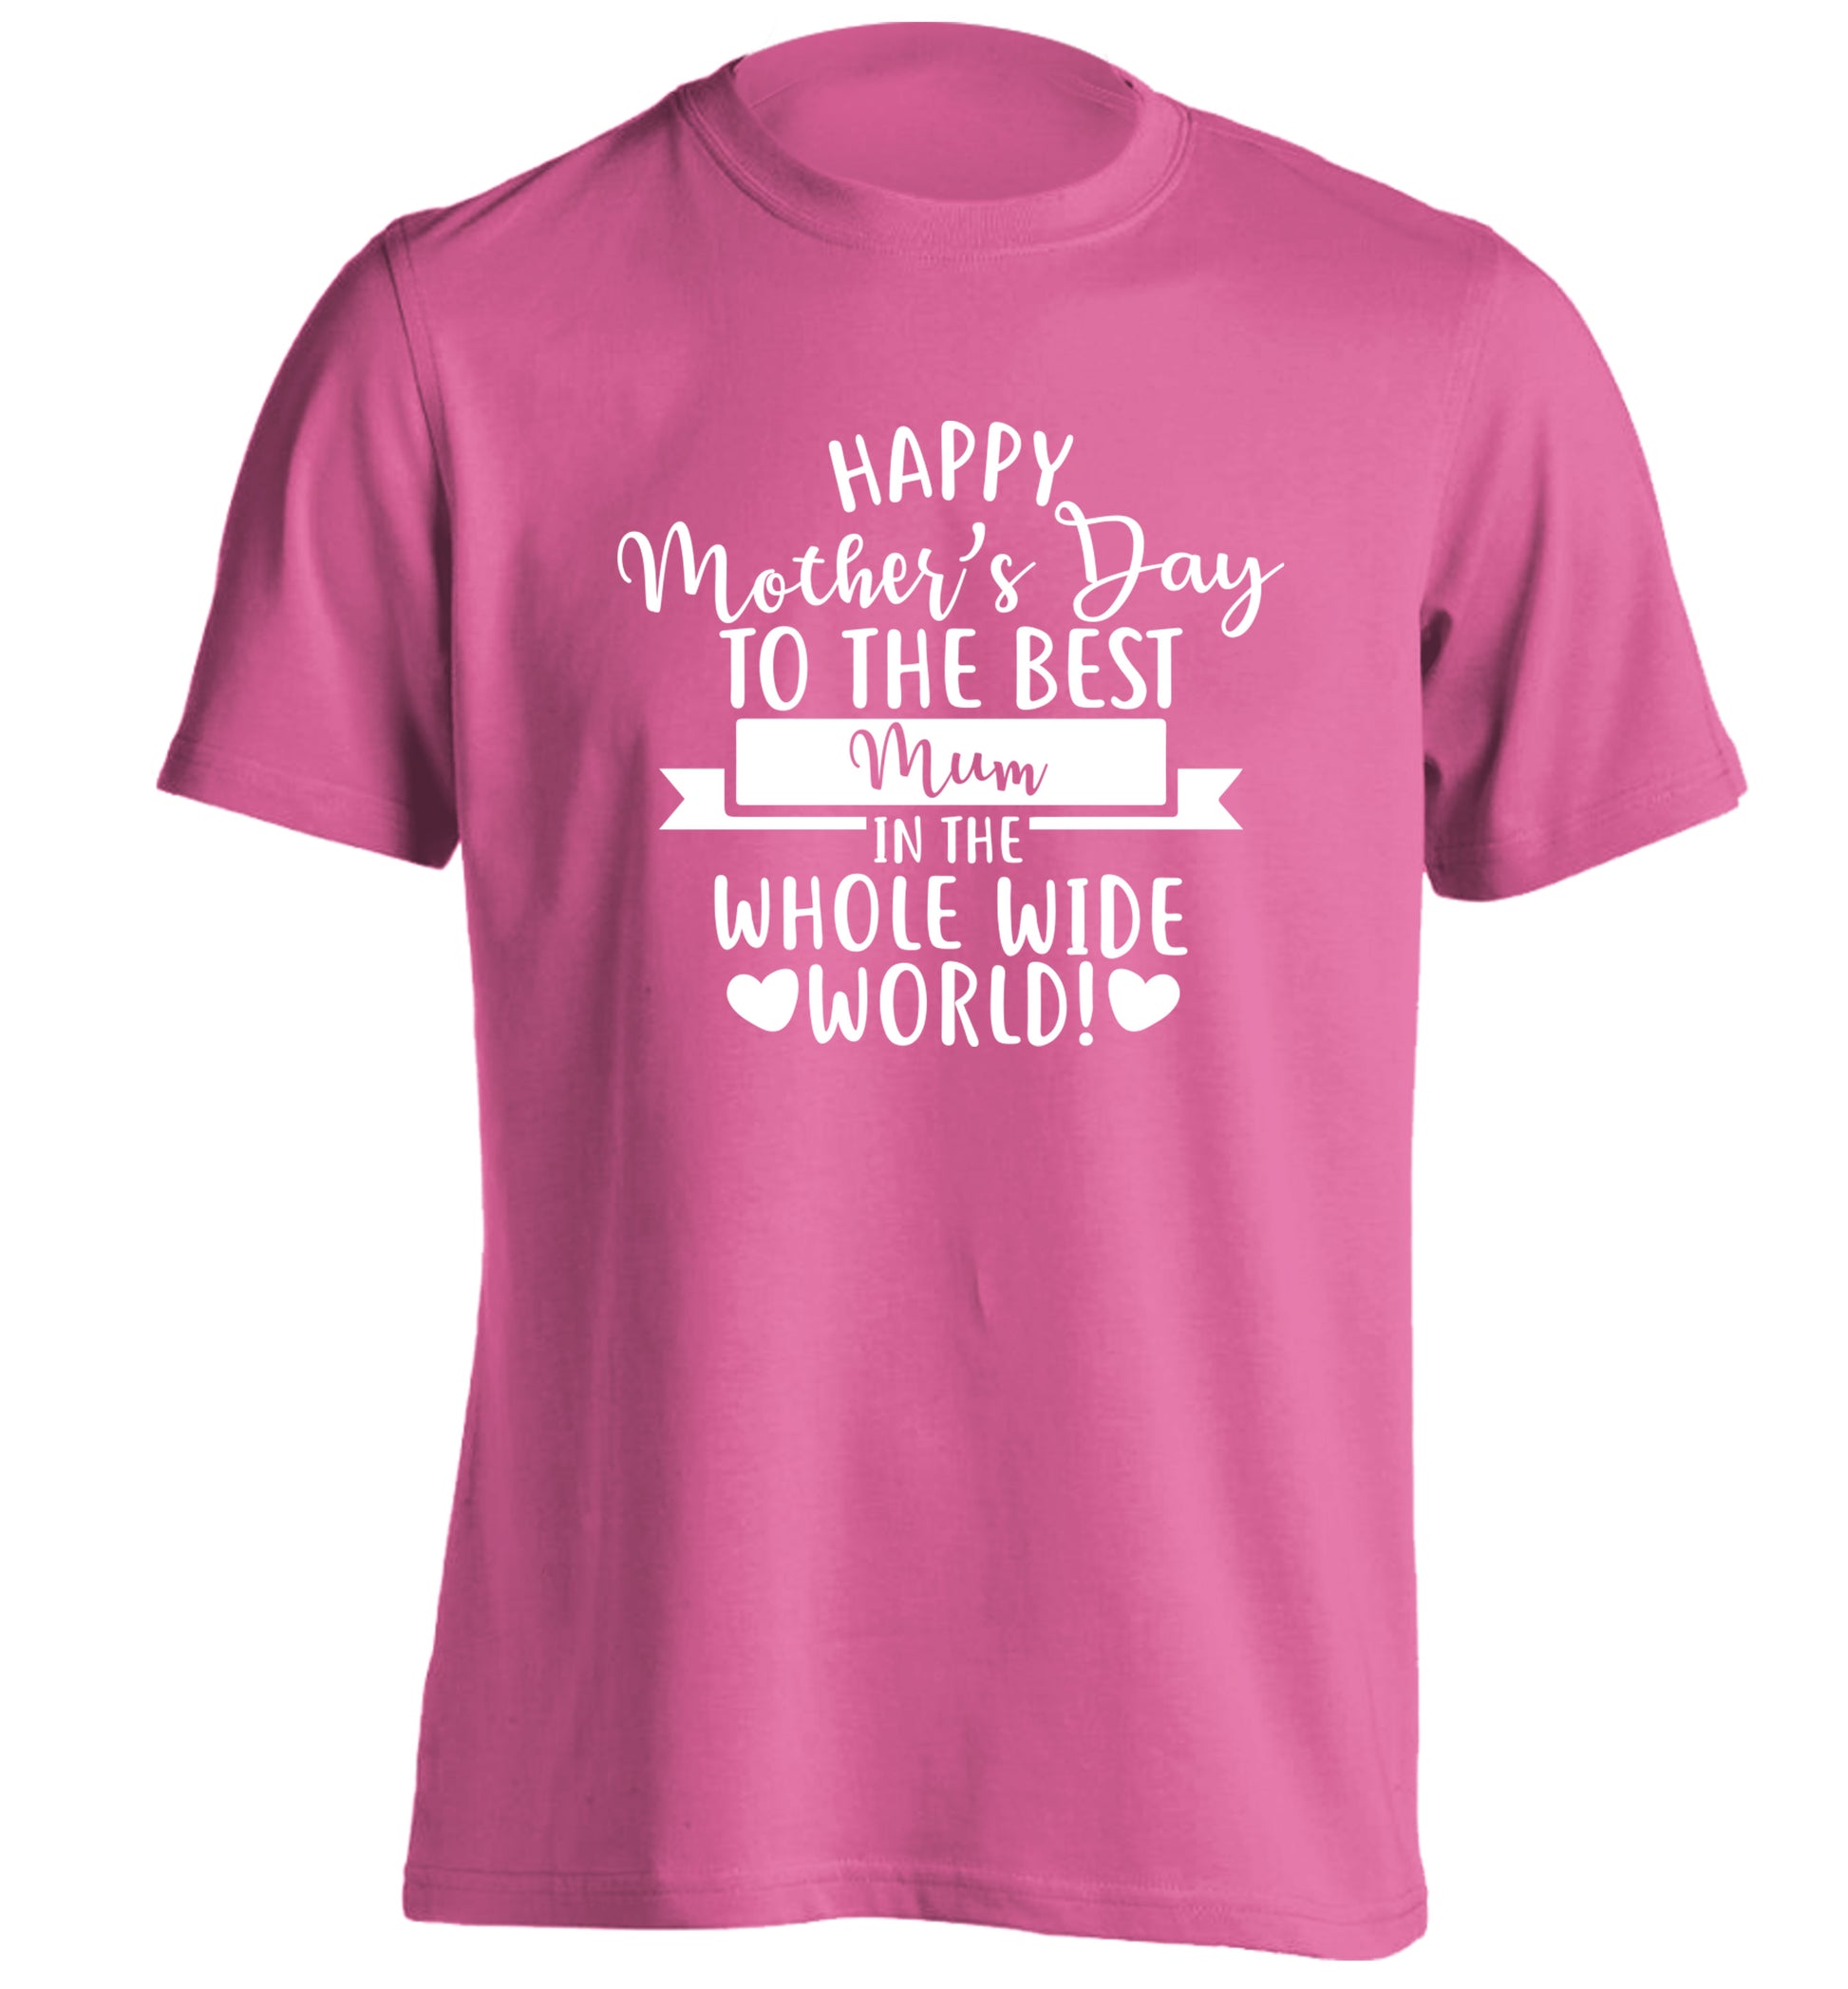 Happy Mother's Day to the best mum in the whole wide world! adults unisex pink Tshirt 2XL